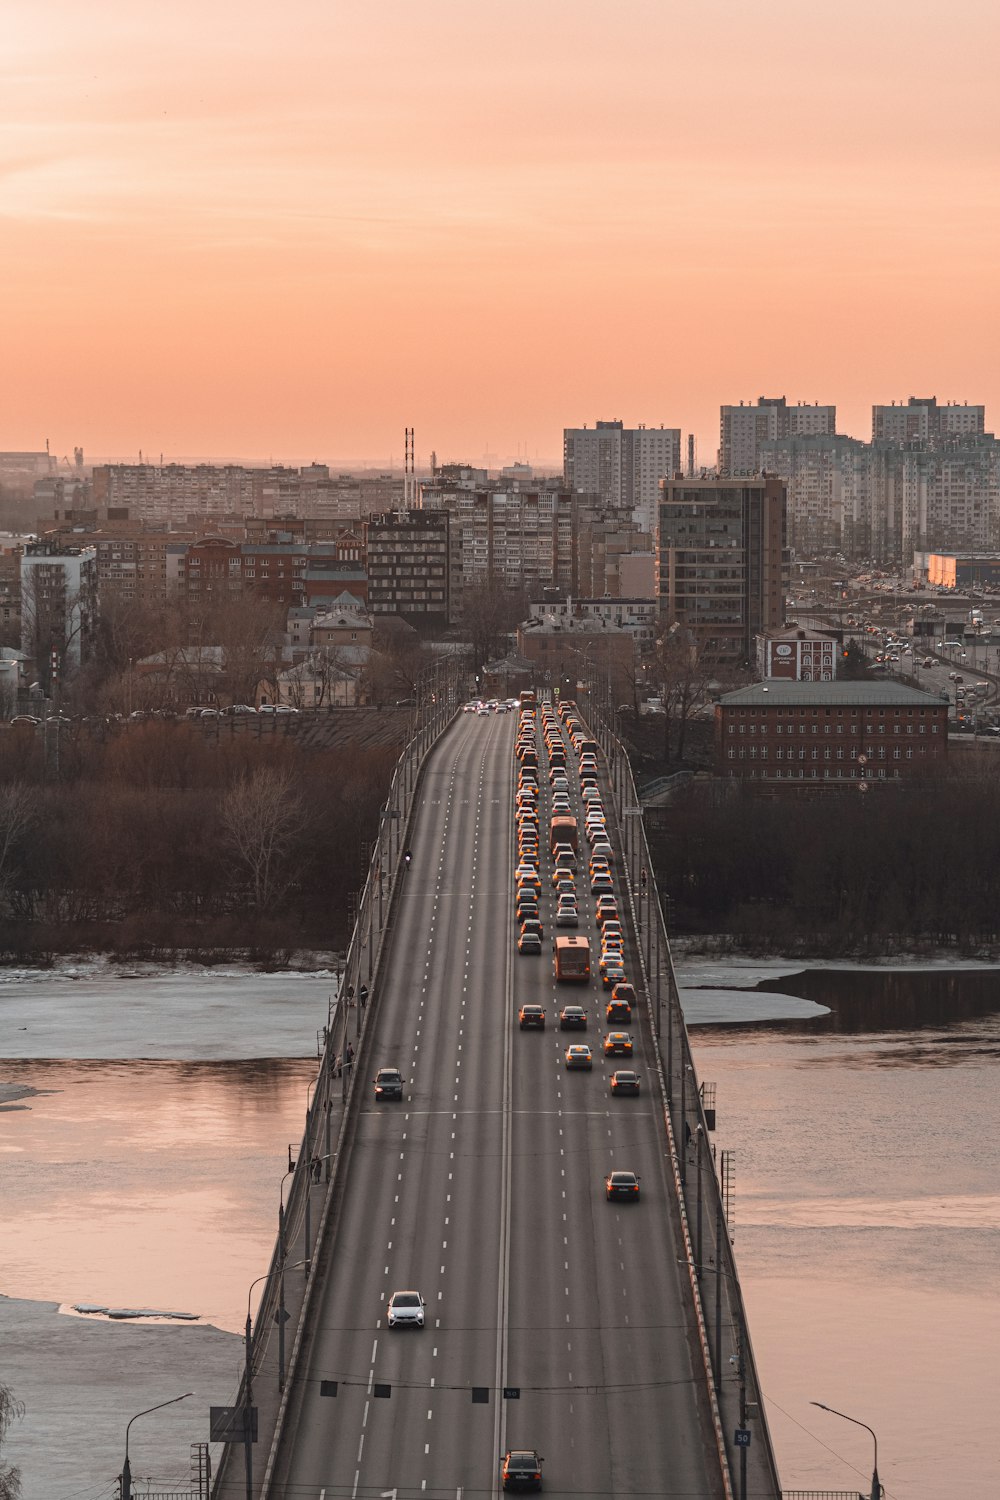 a long bridge over a river with cars on it